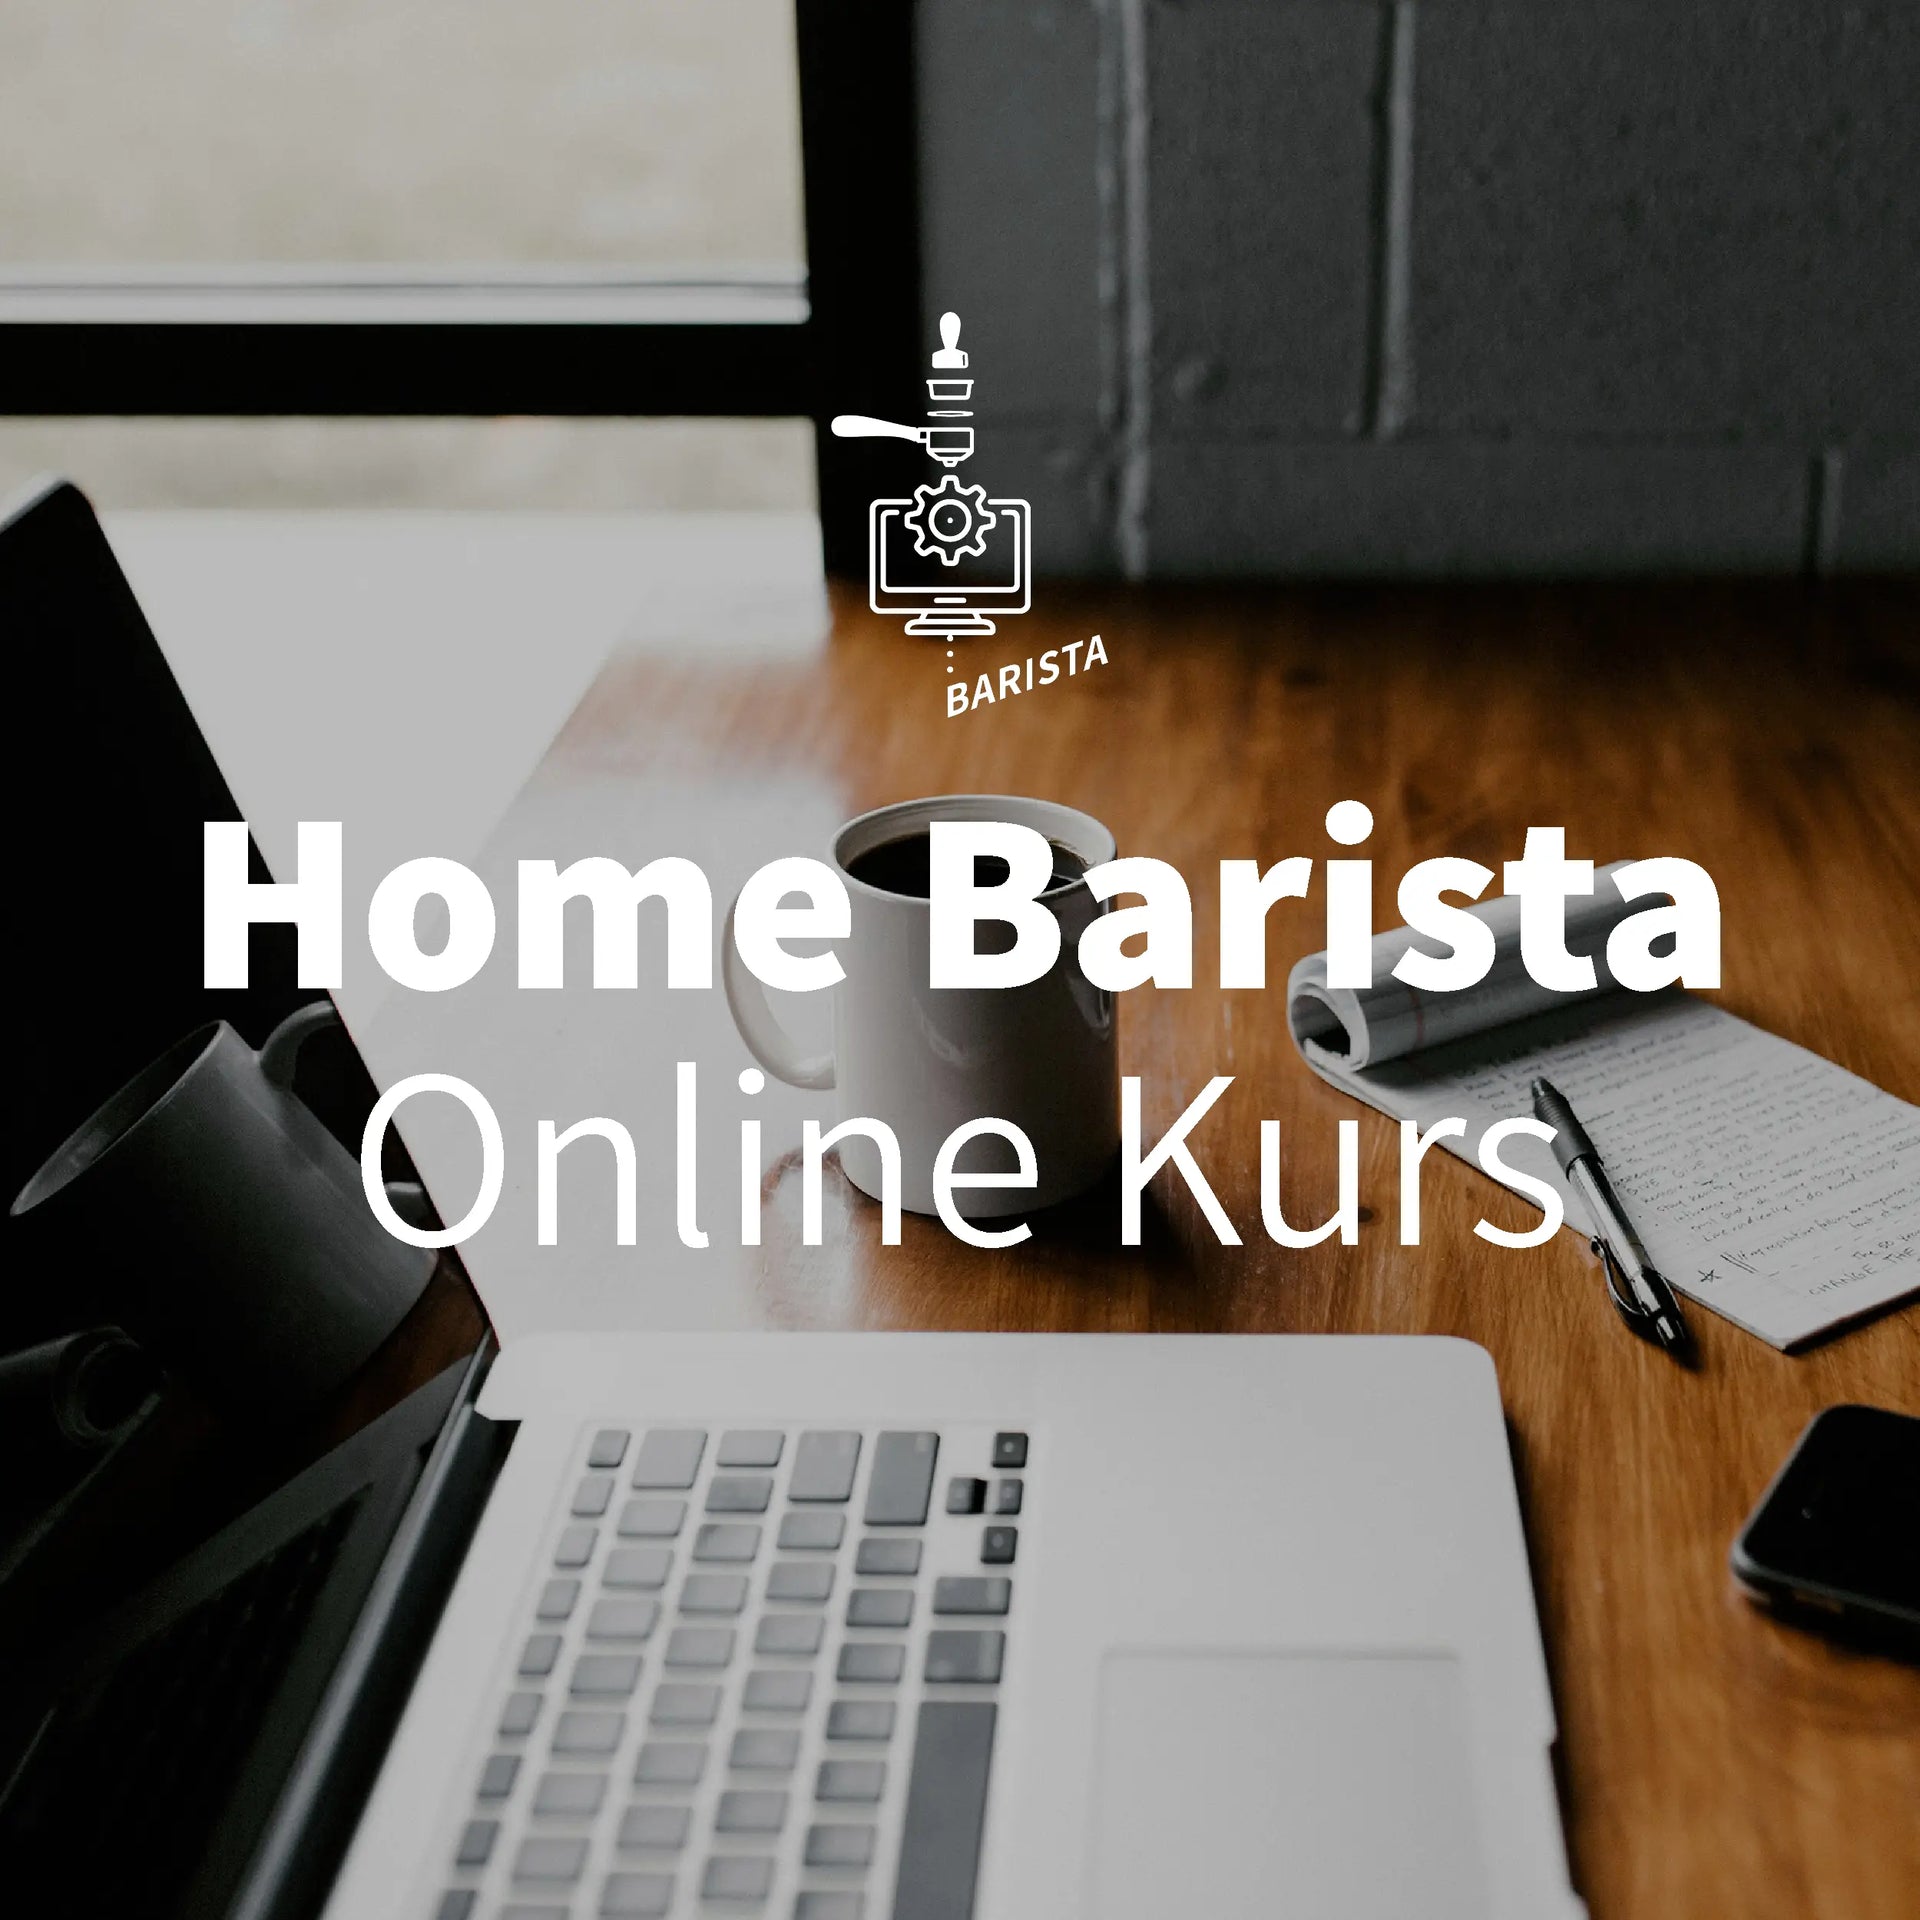 Home Barista online course - e-learning platform